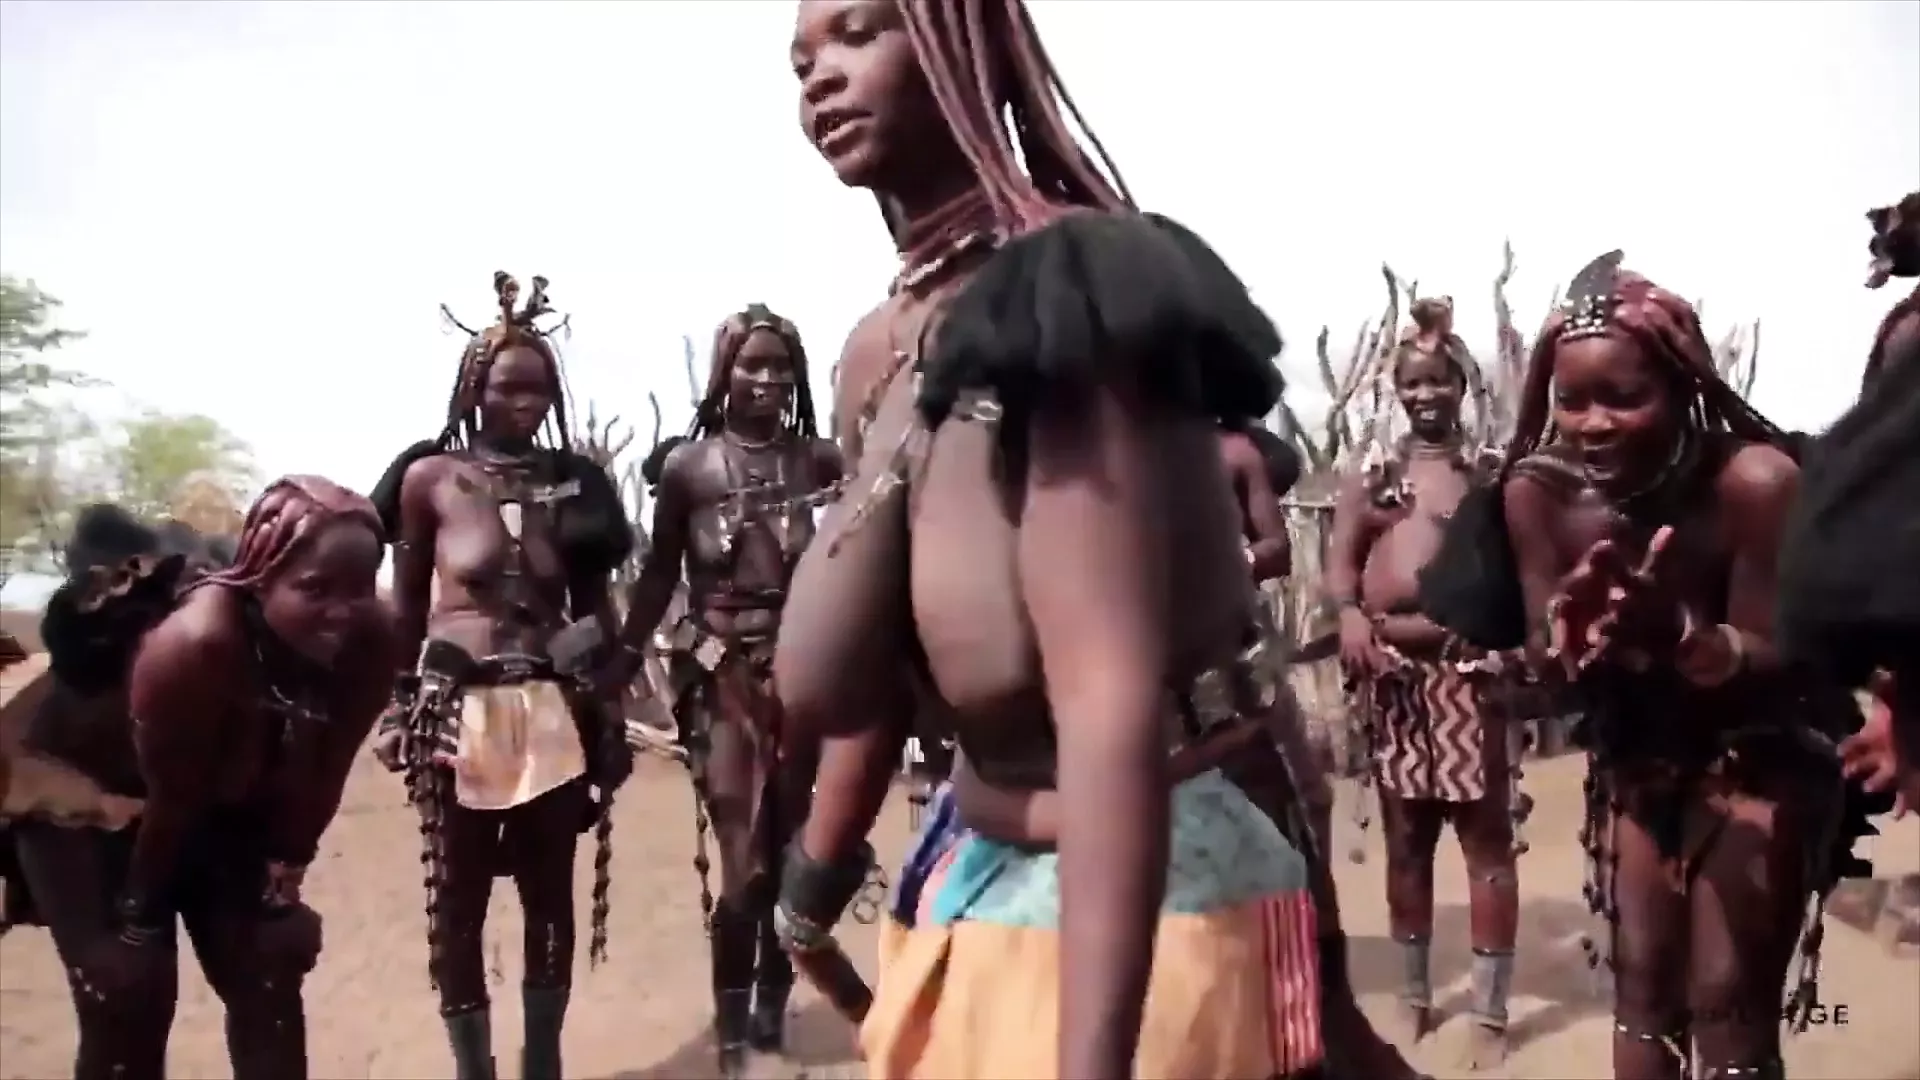 African Himba Women Dance and Swing Their Saggy Tits Around | xHamster